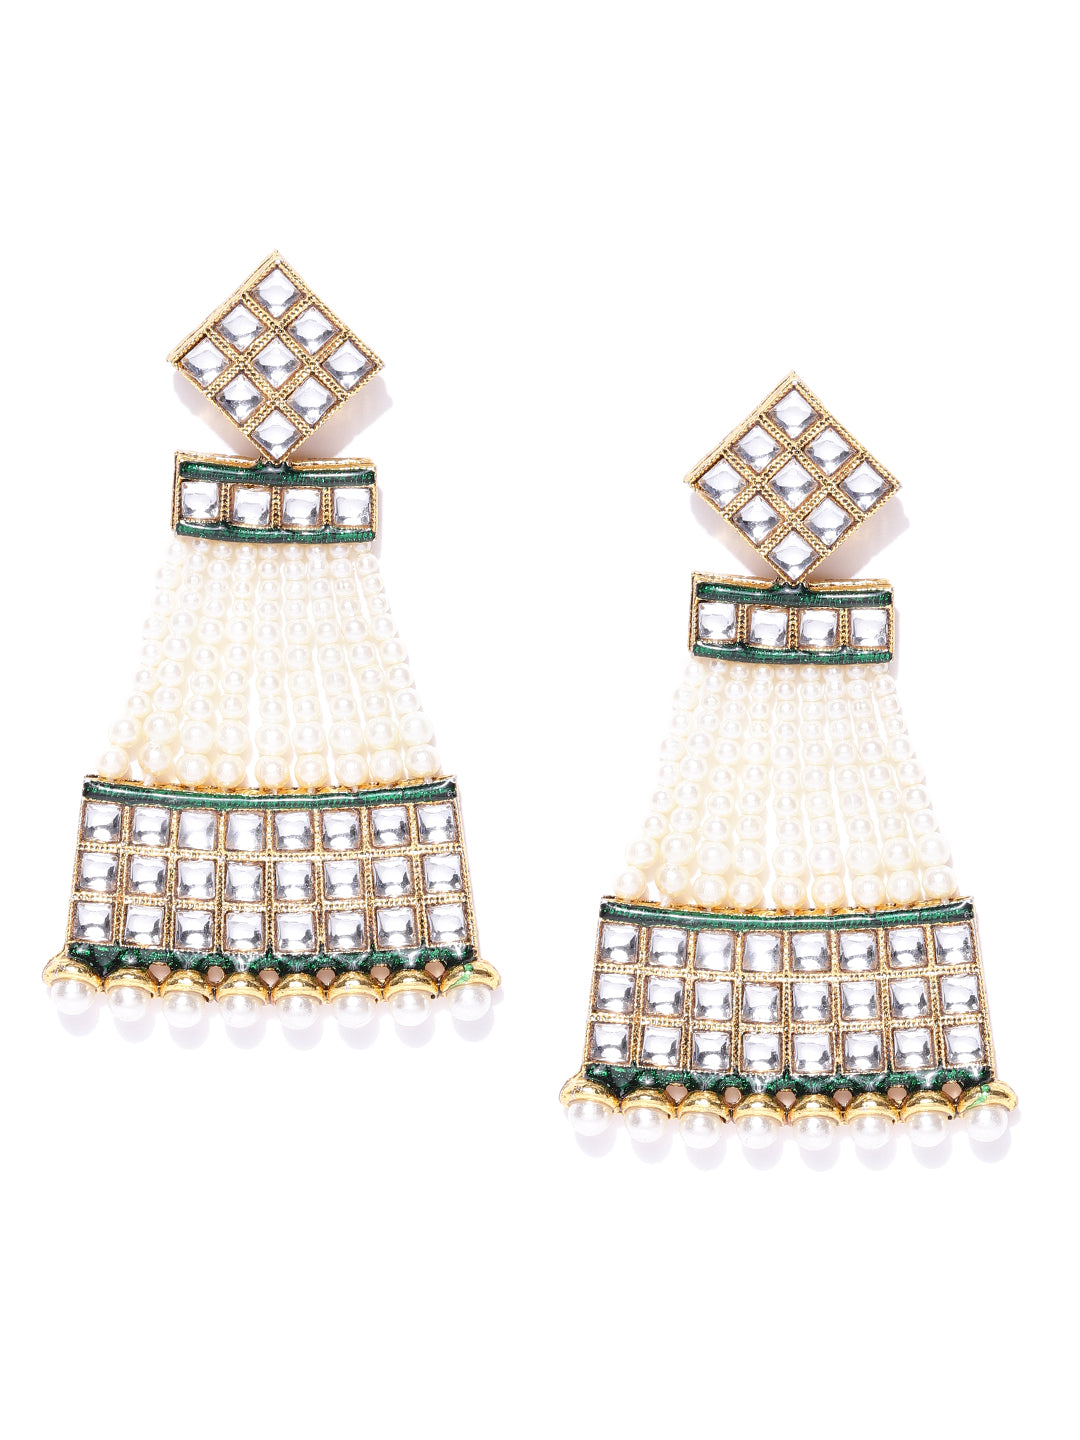 Gold-Plated Kundan and Pearls Studded Drop Earrings